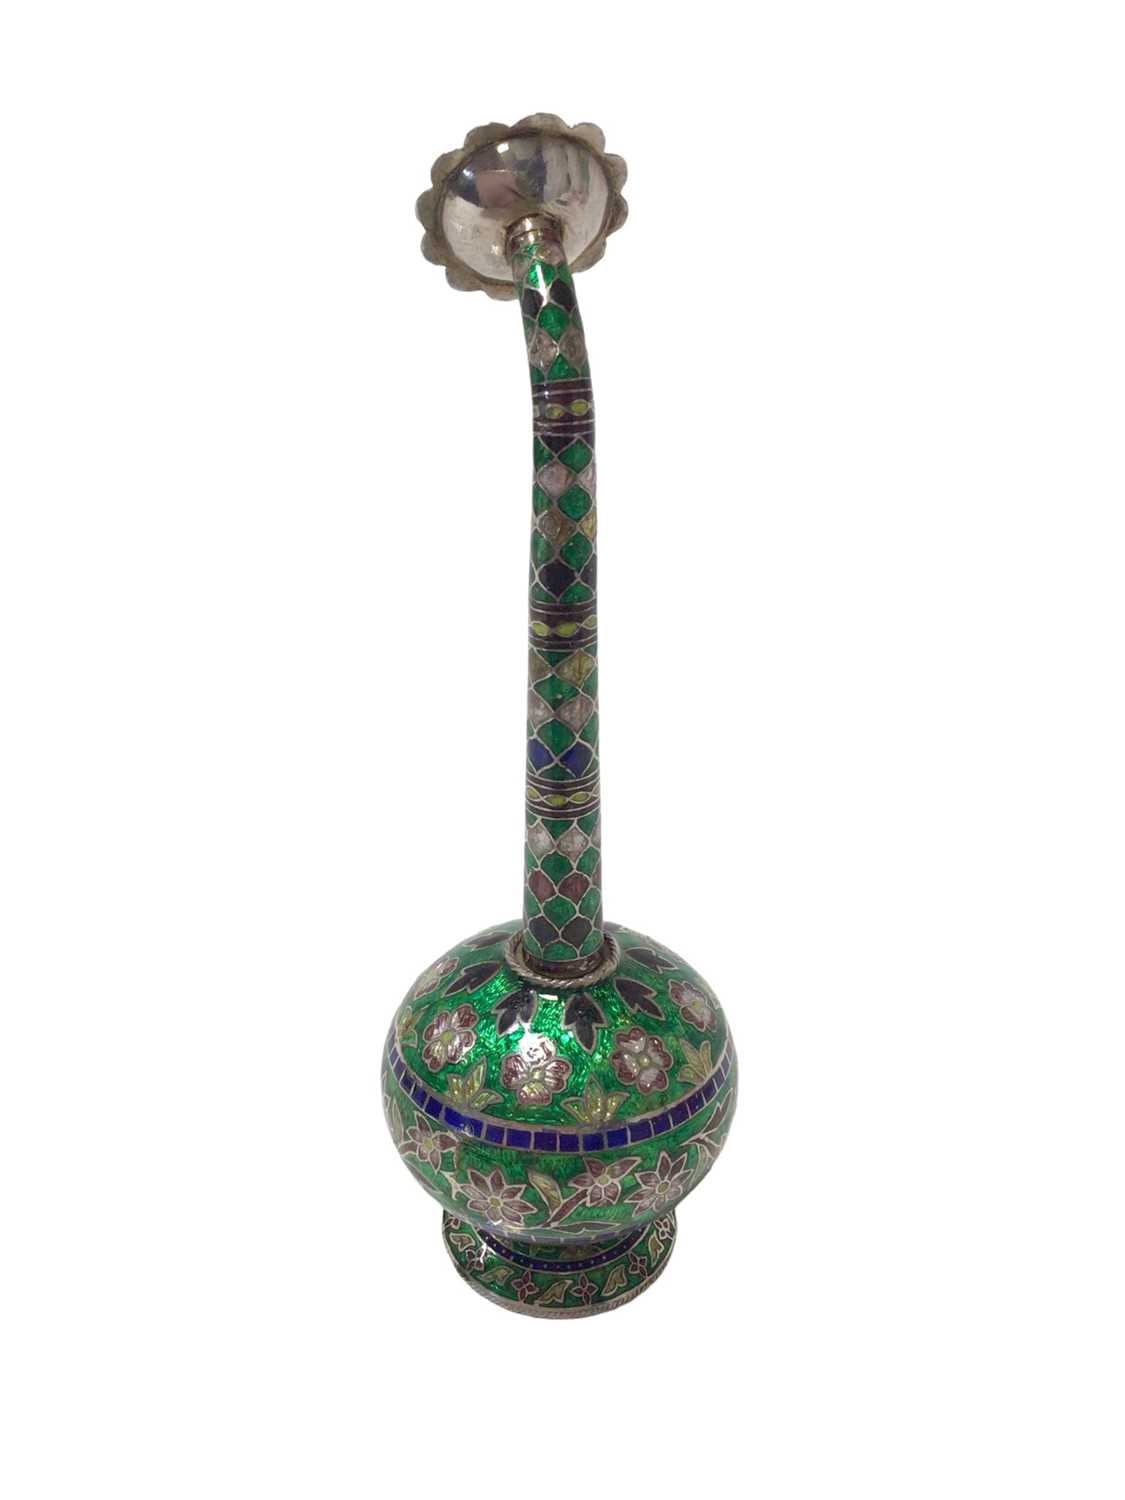 Middle Eastern silver and enamel rose water sprinkler, 17cm in overall height - Image 3 of 4